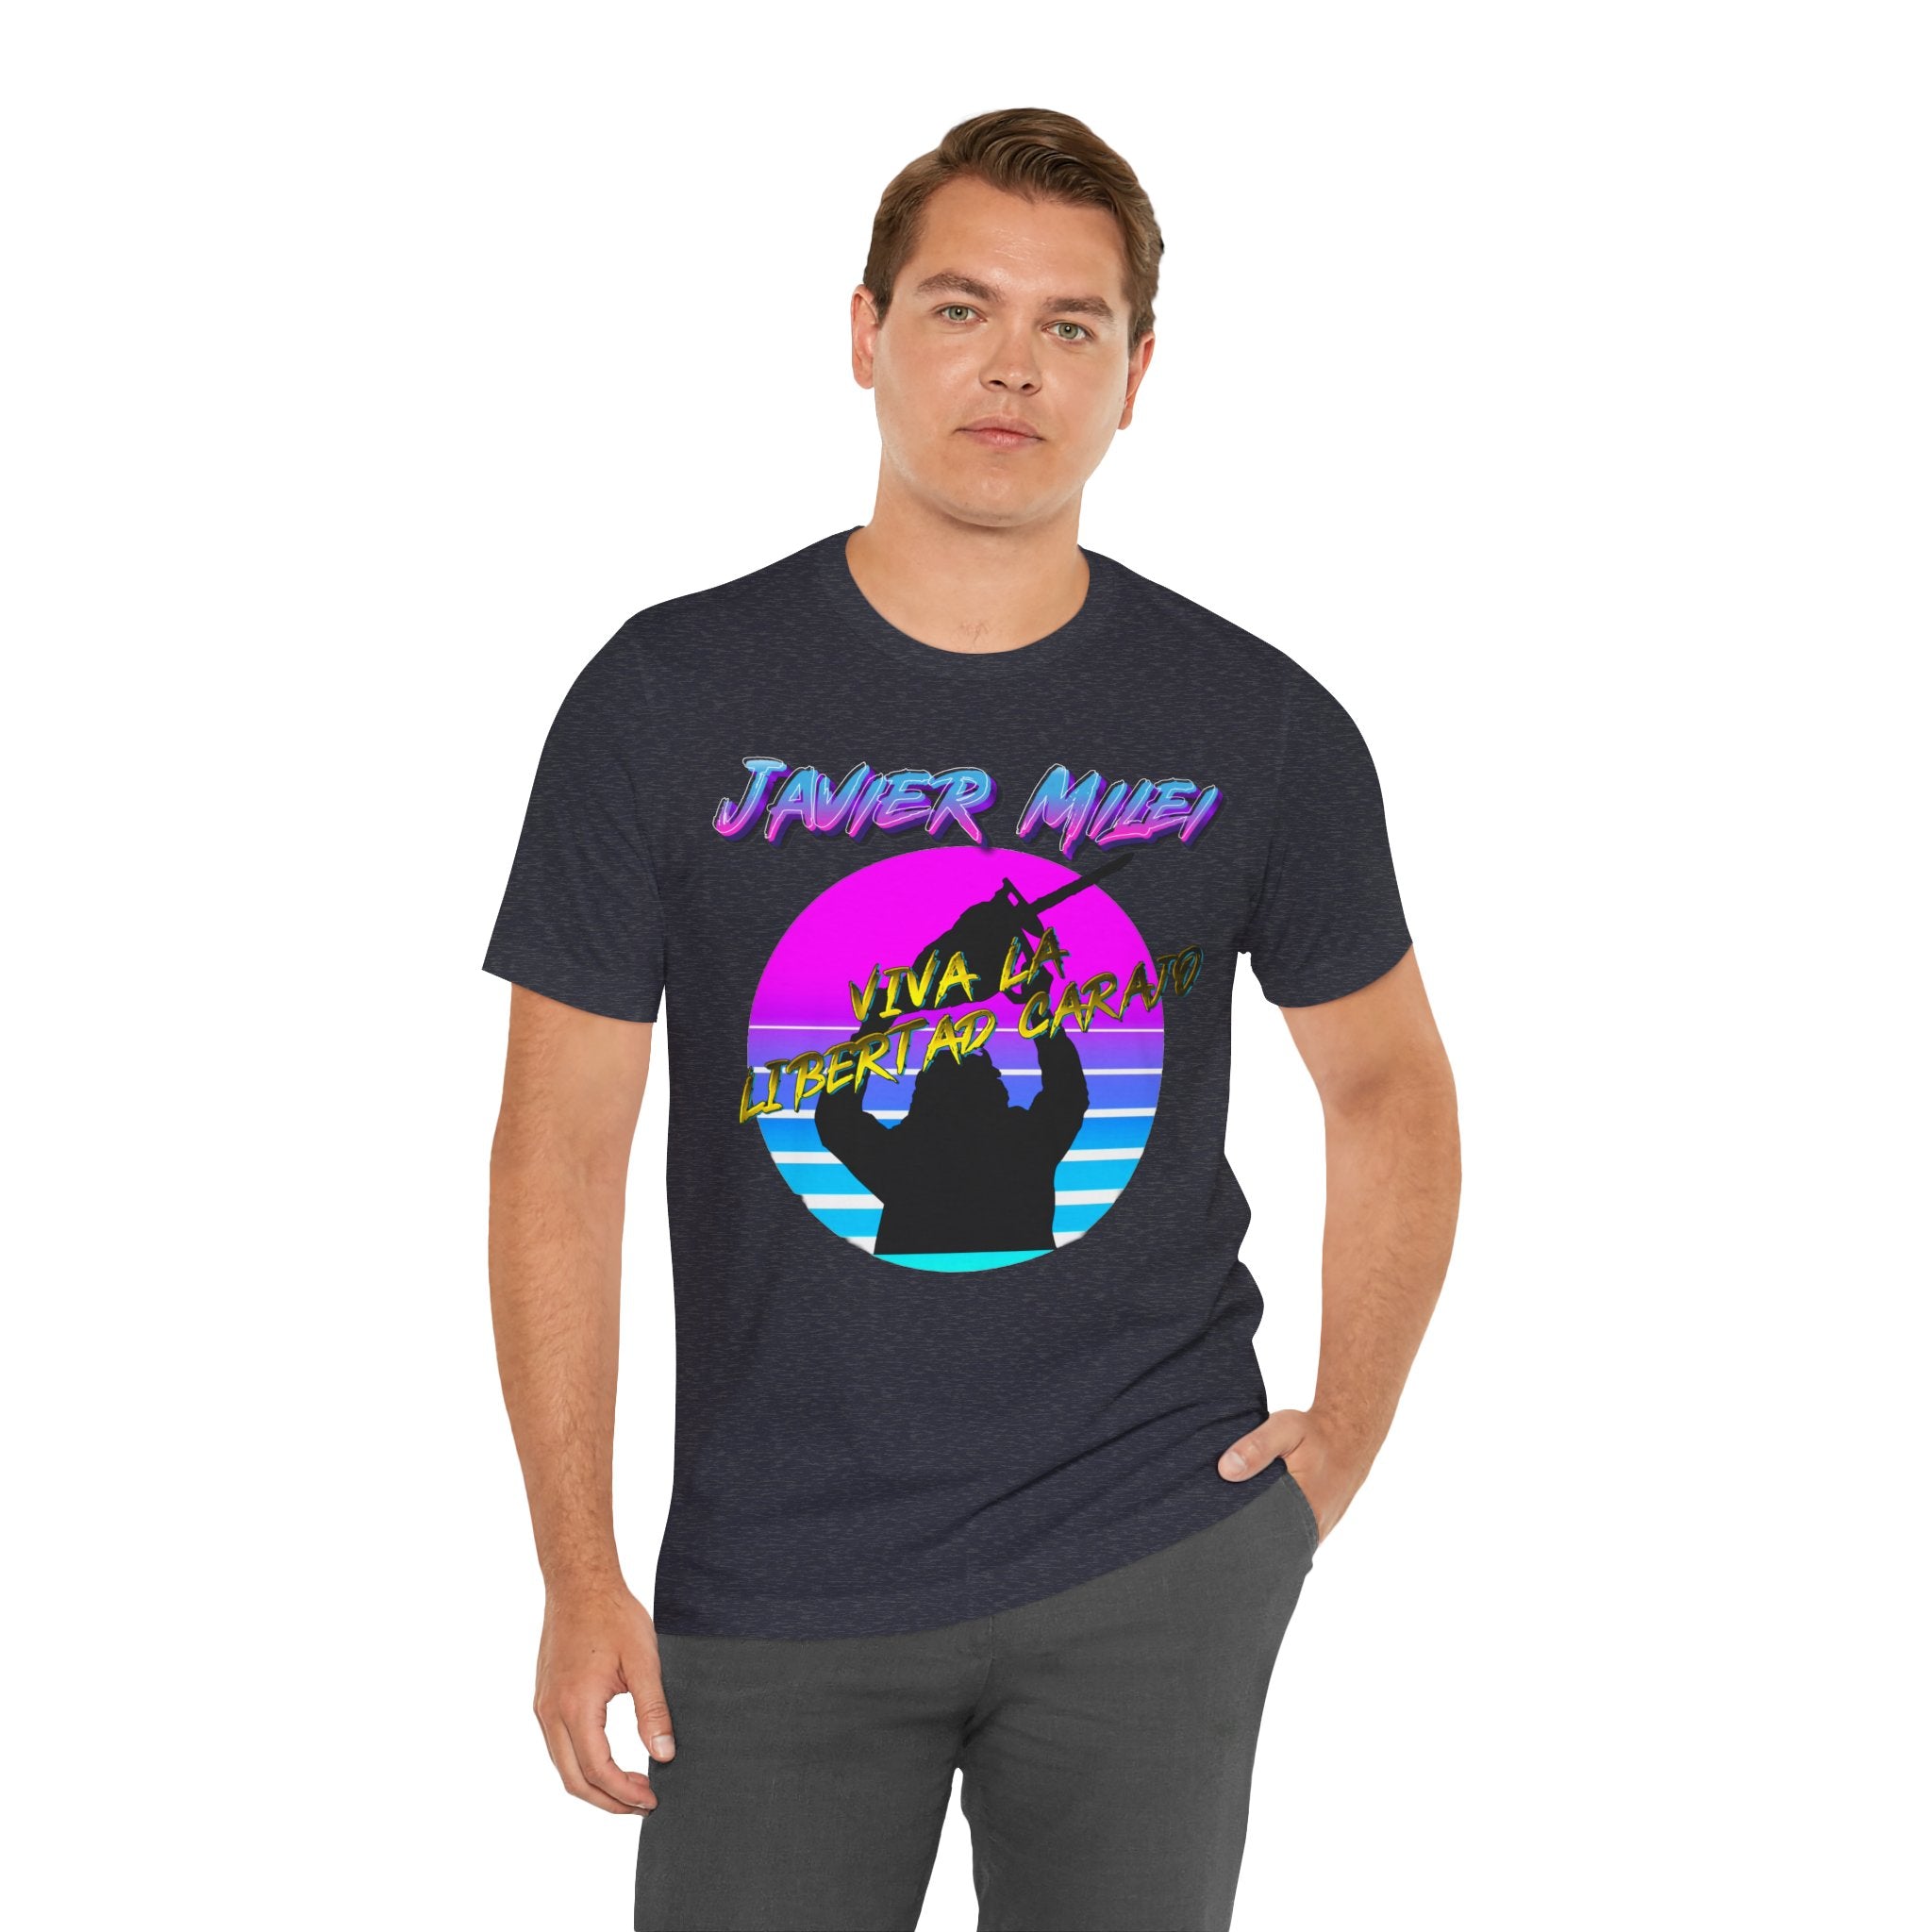 "Chainsaw of Freedom" Javier Milei Synthwave Tee